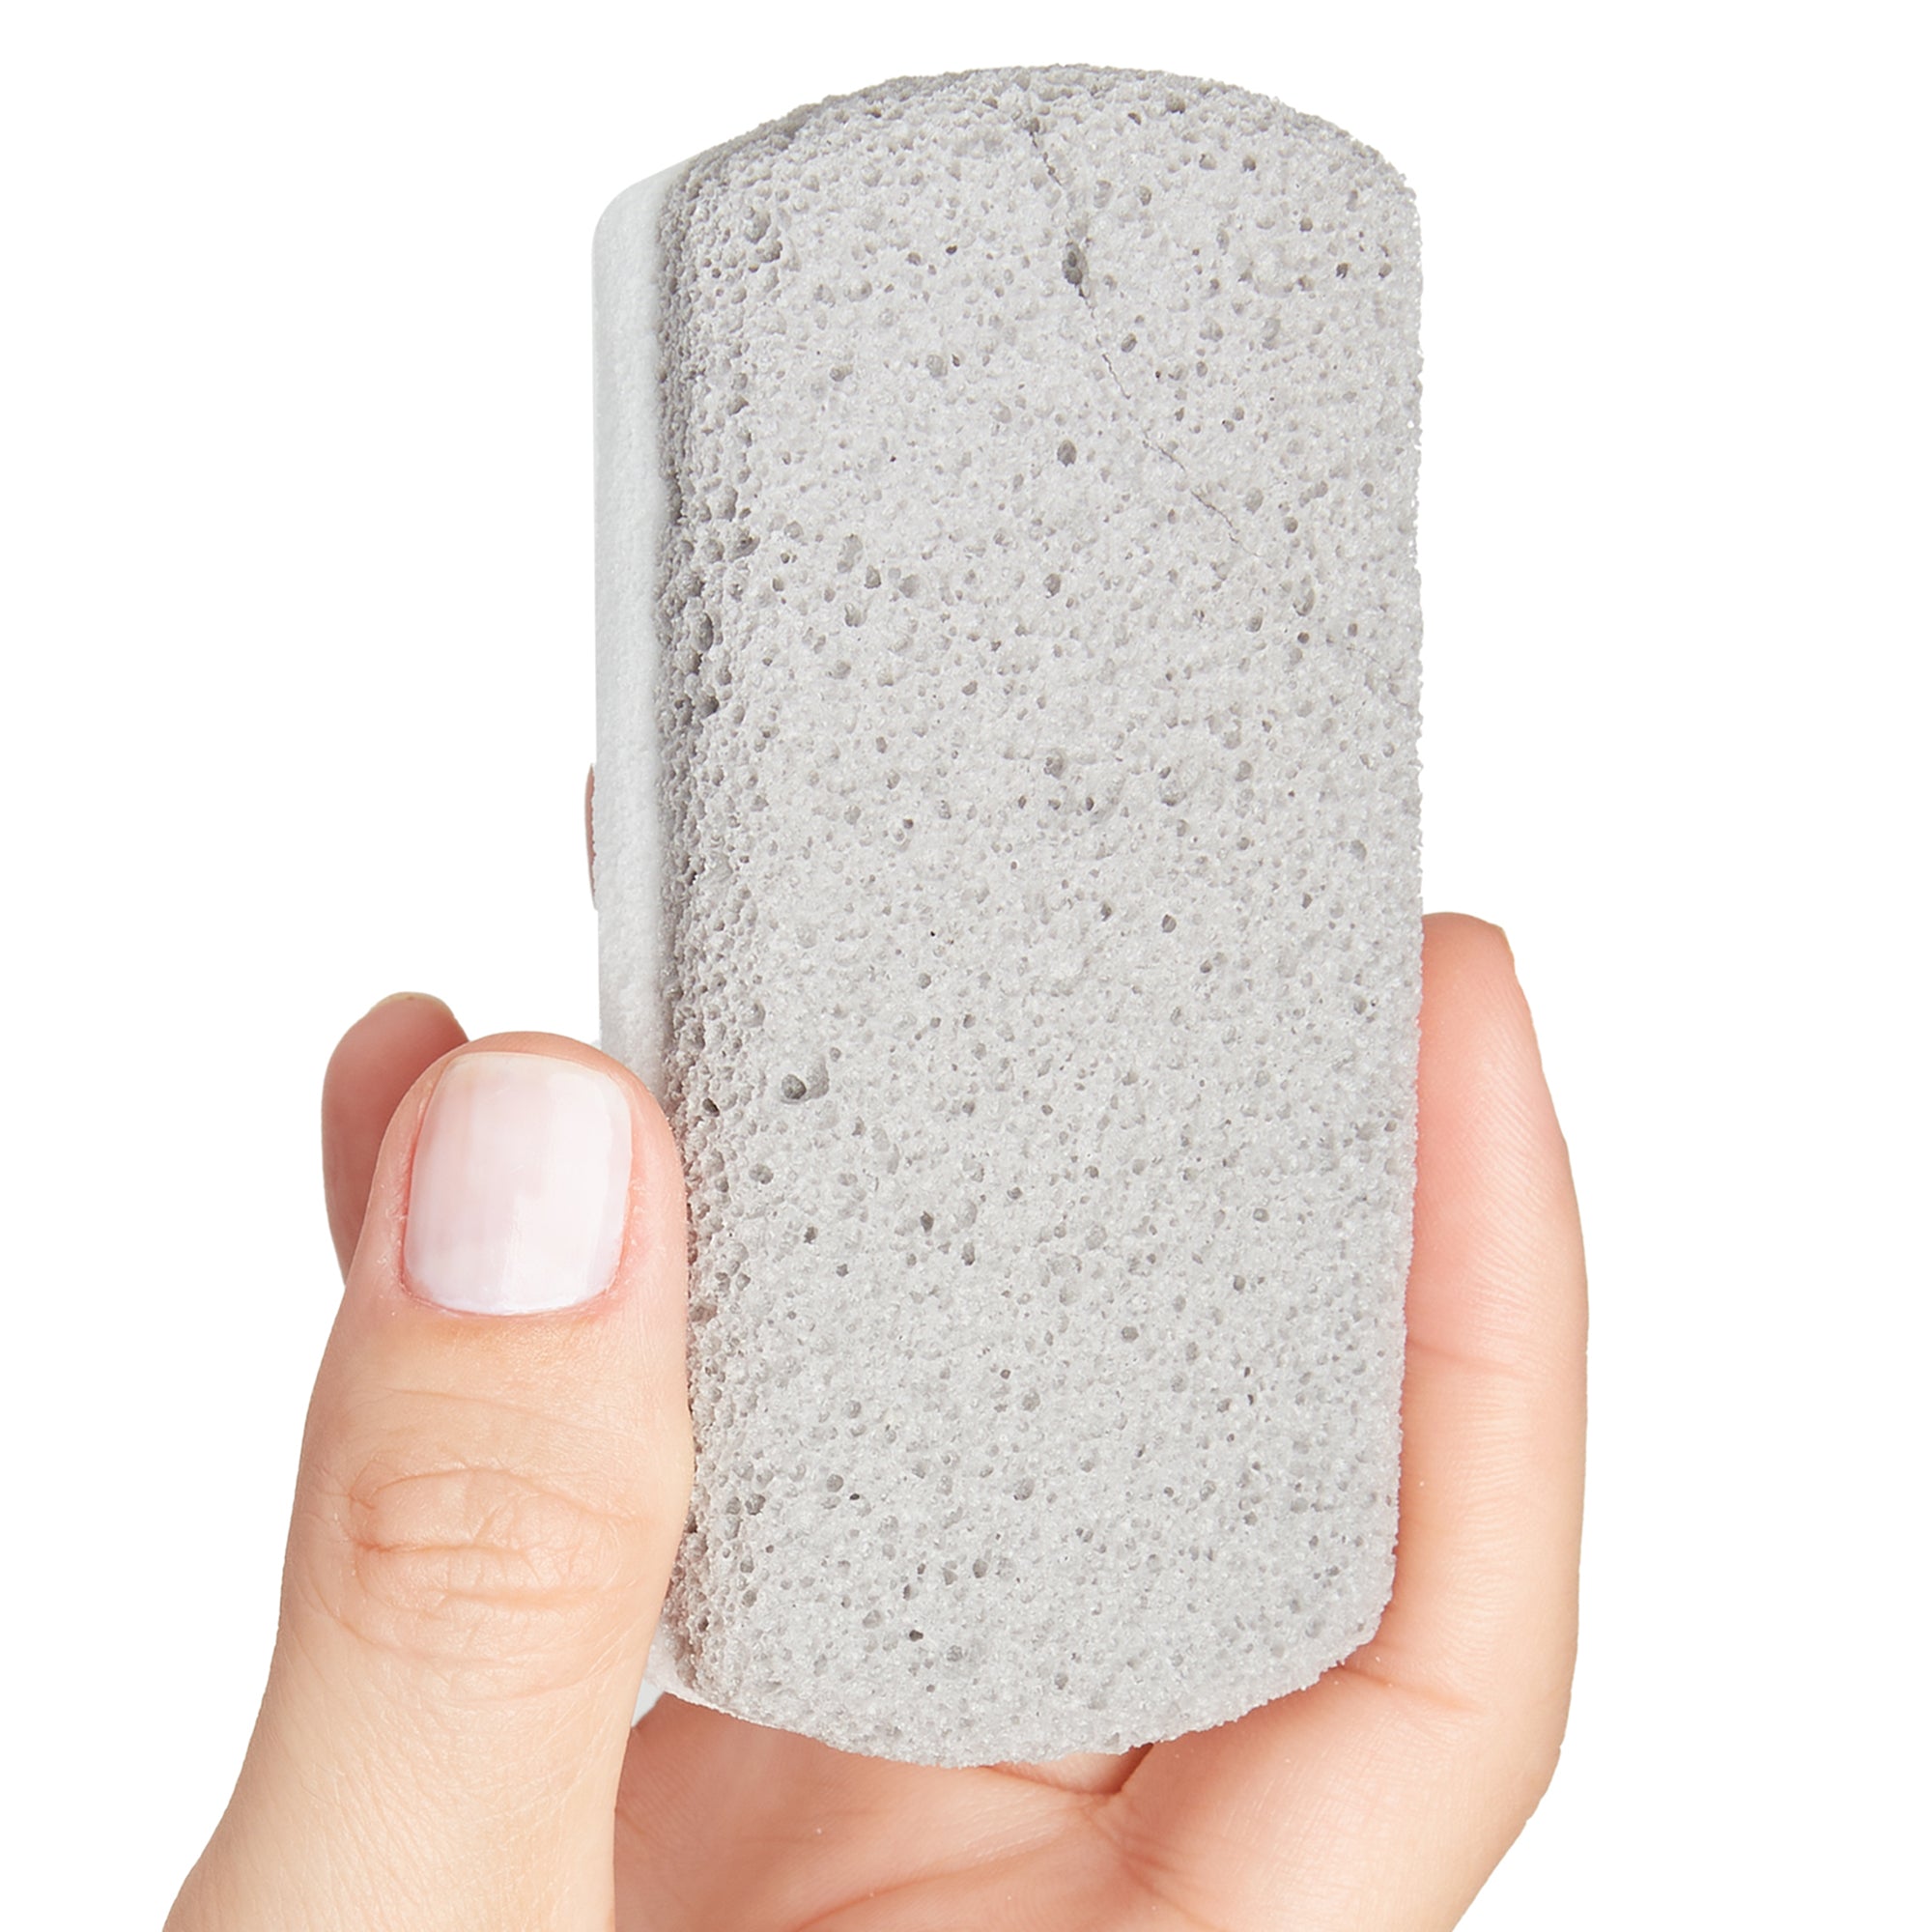 How to Use a Pumice Stone for Your Softest, Smoothest Feet Ever